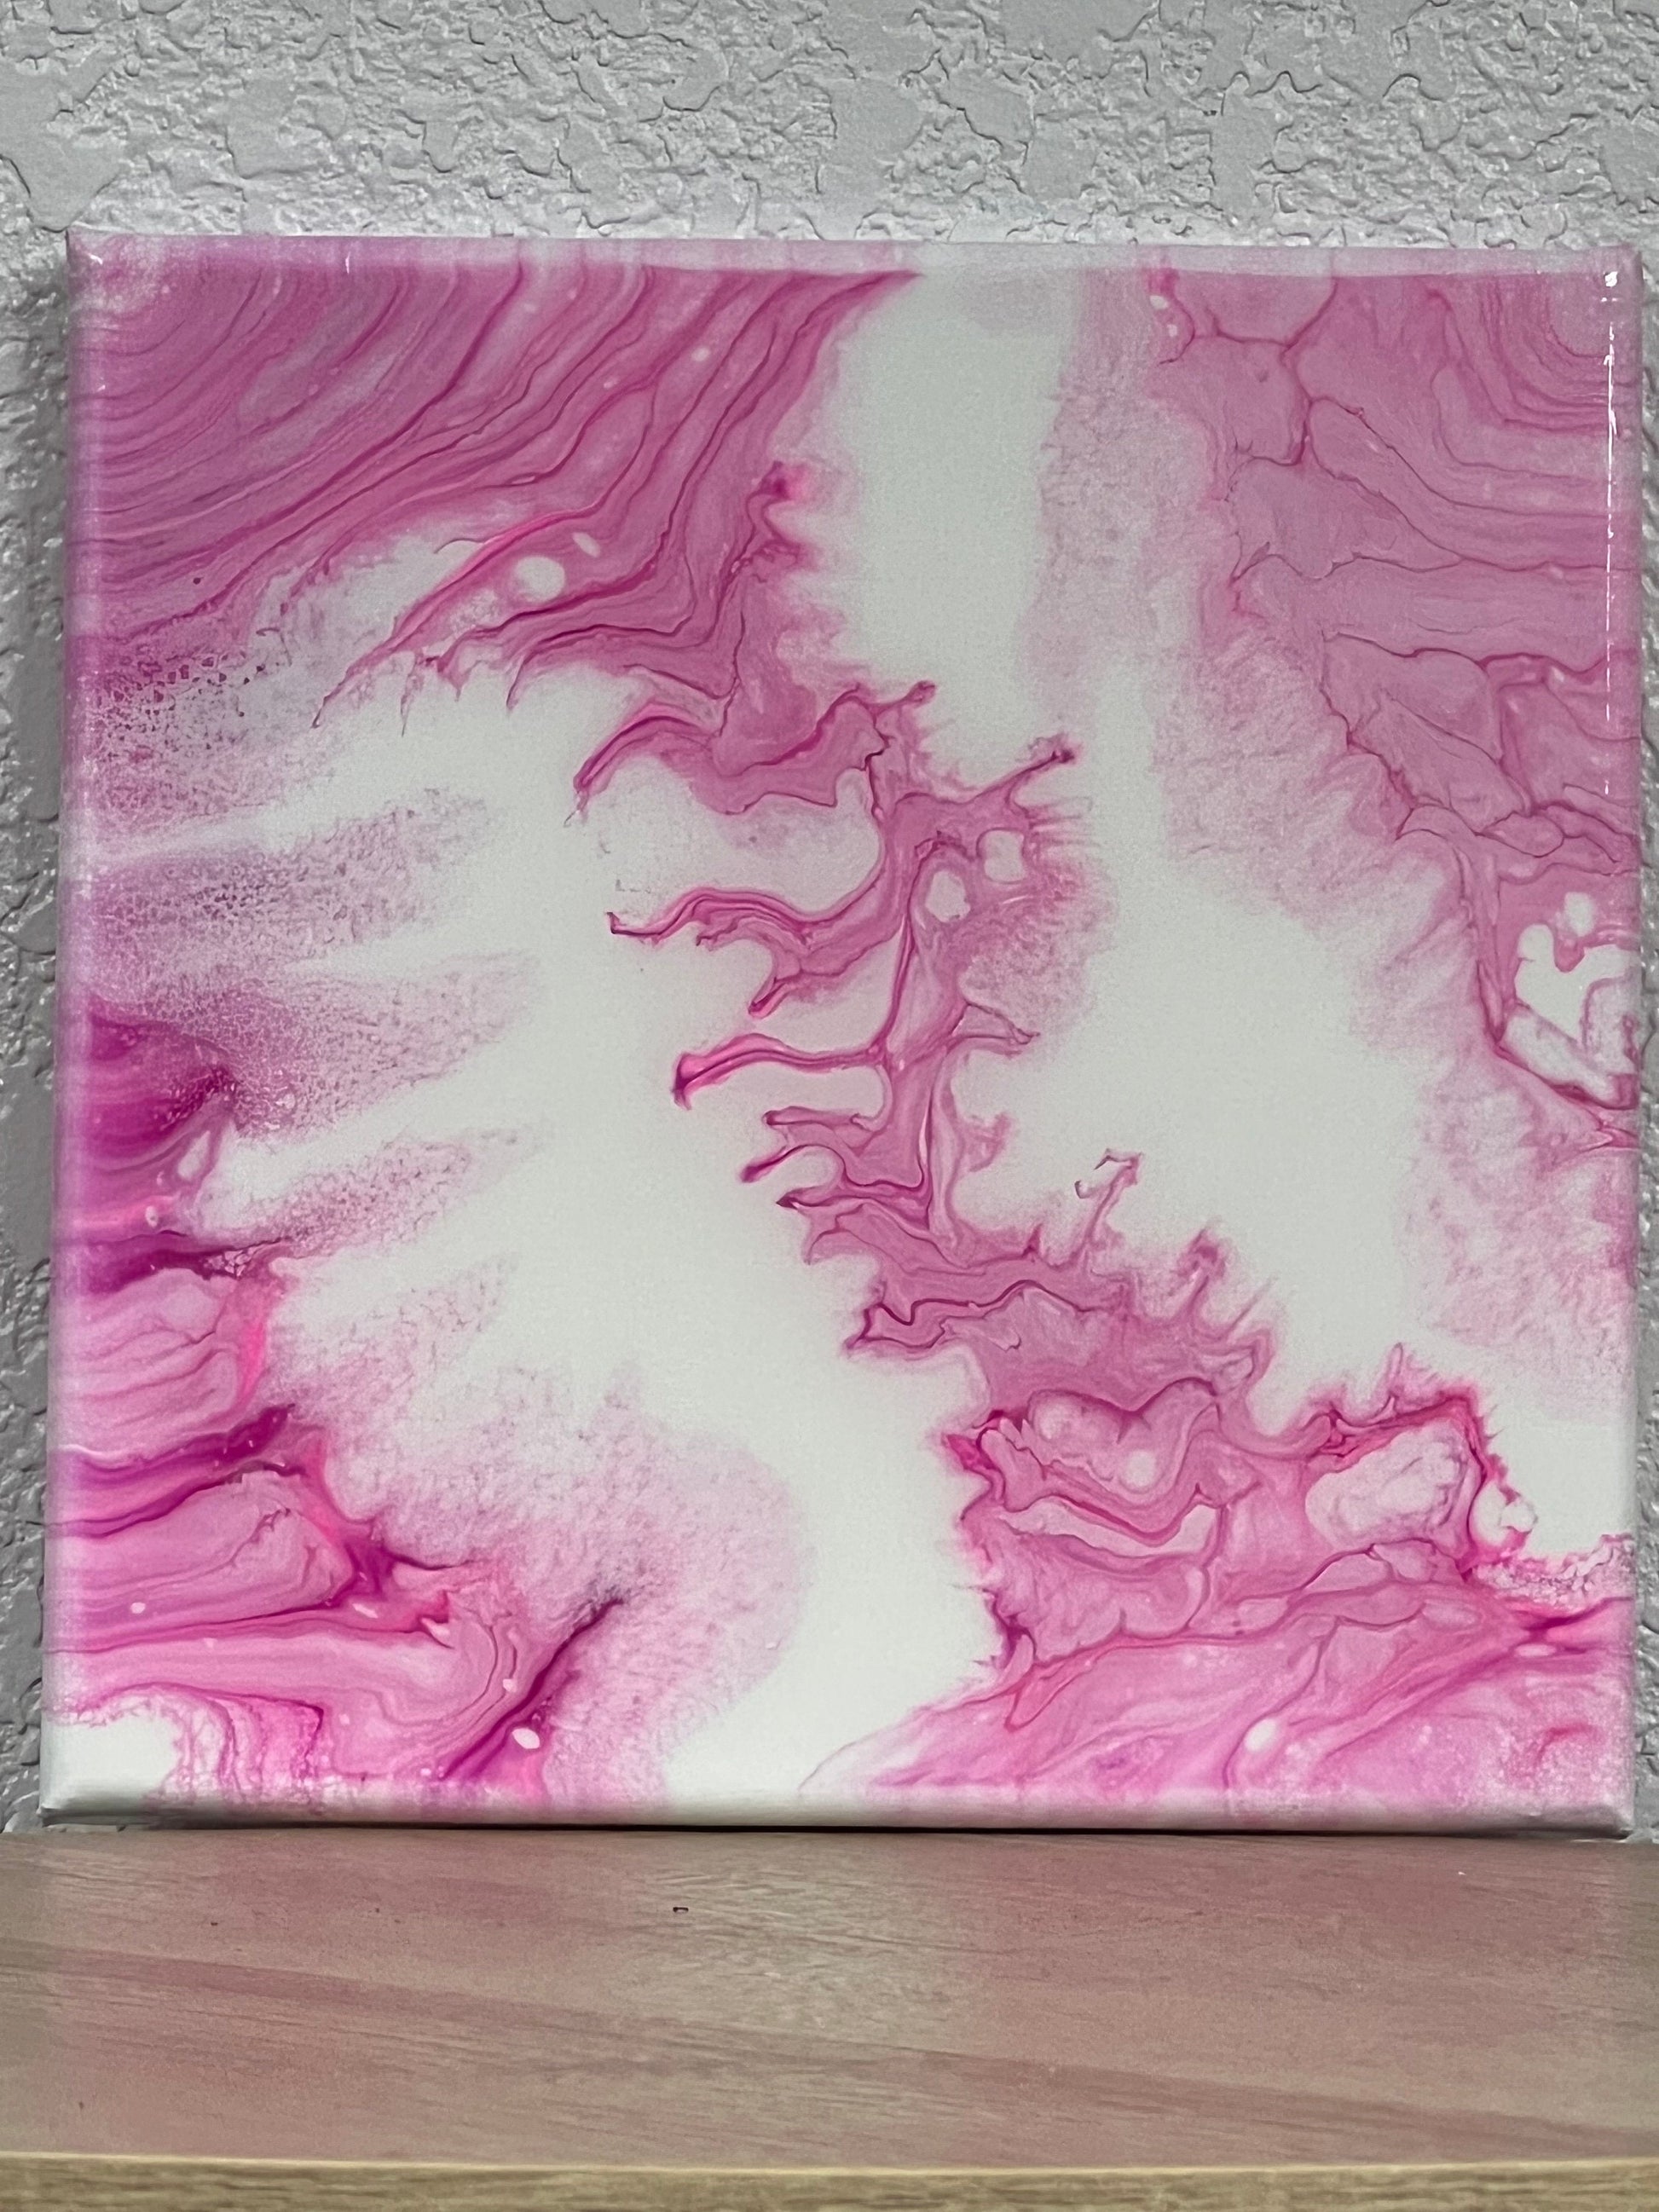 Pink and White 8x8 Abstract Acrylic Fluid Art Painting